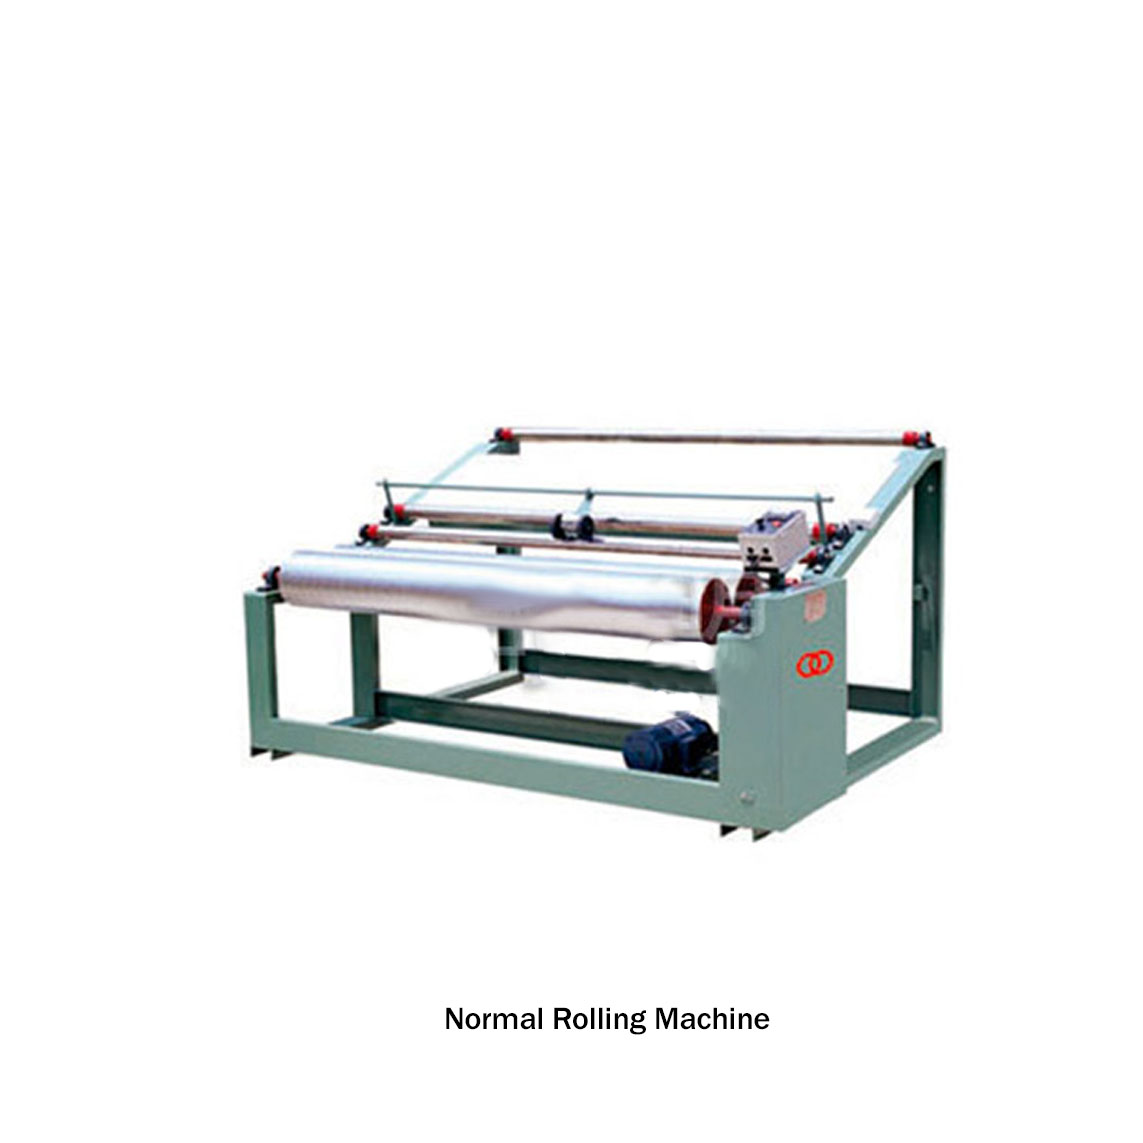 Normal Rolling Machine